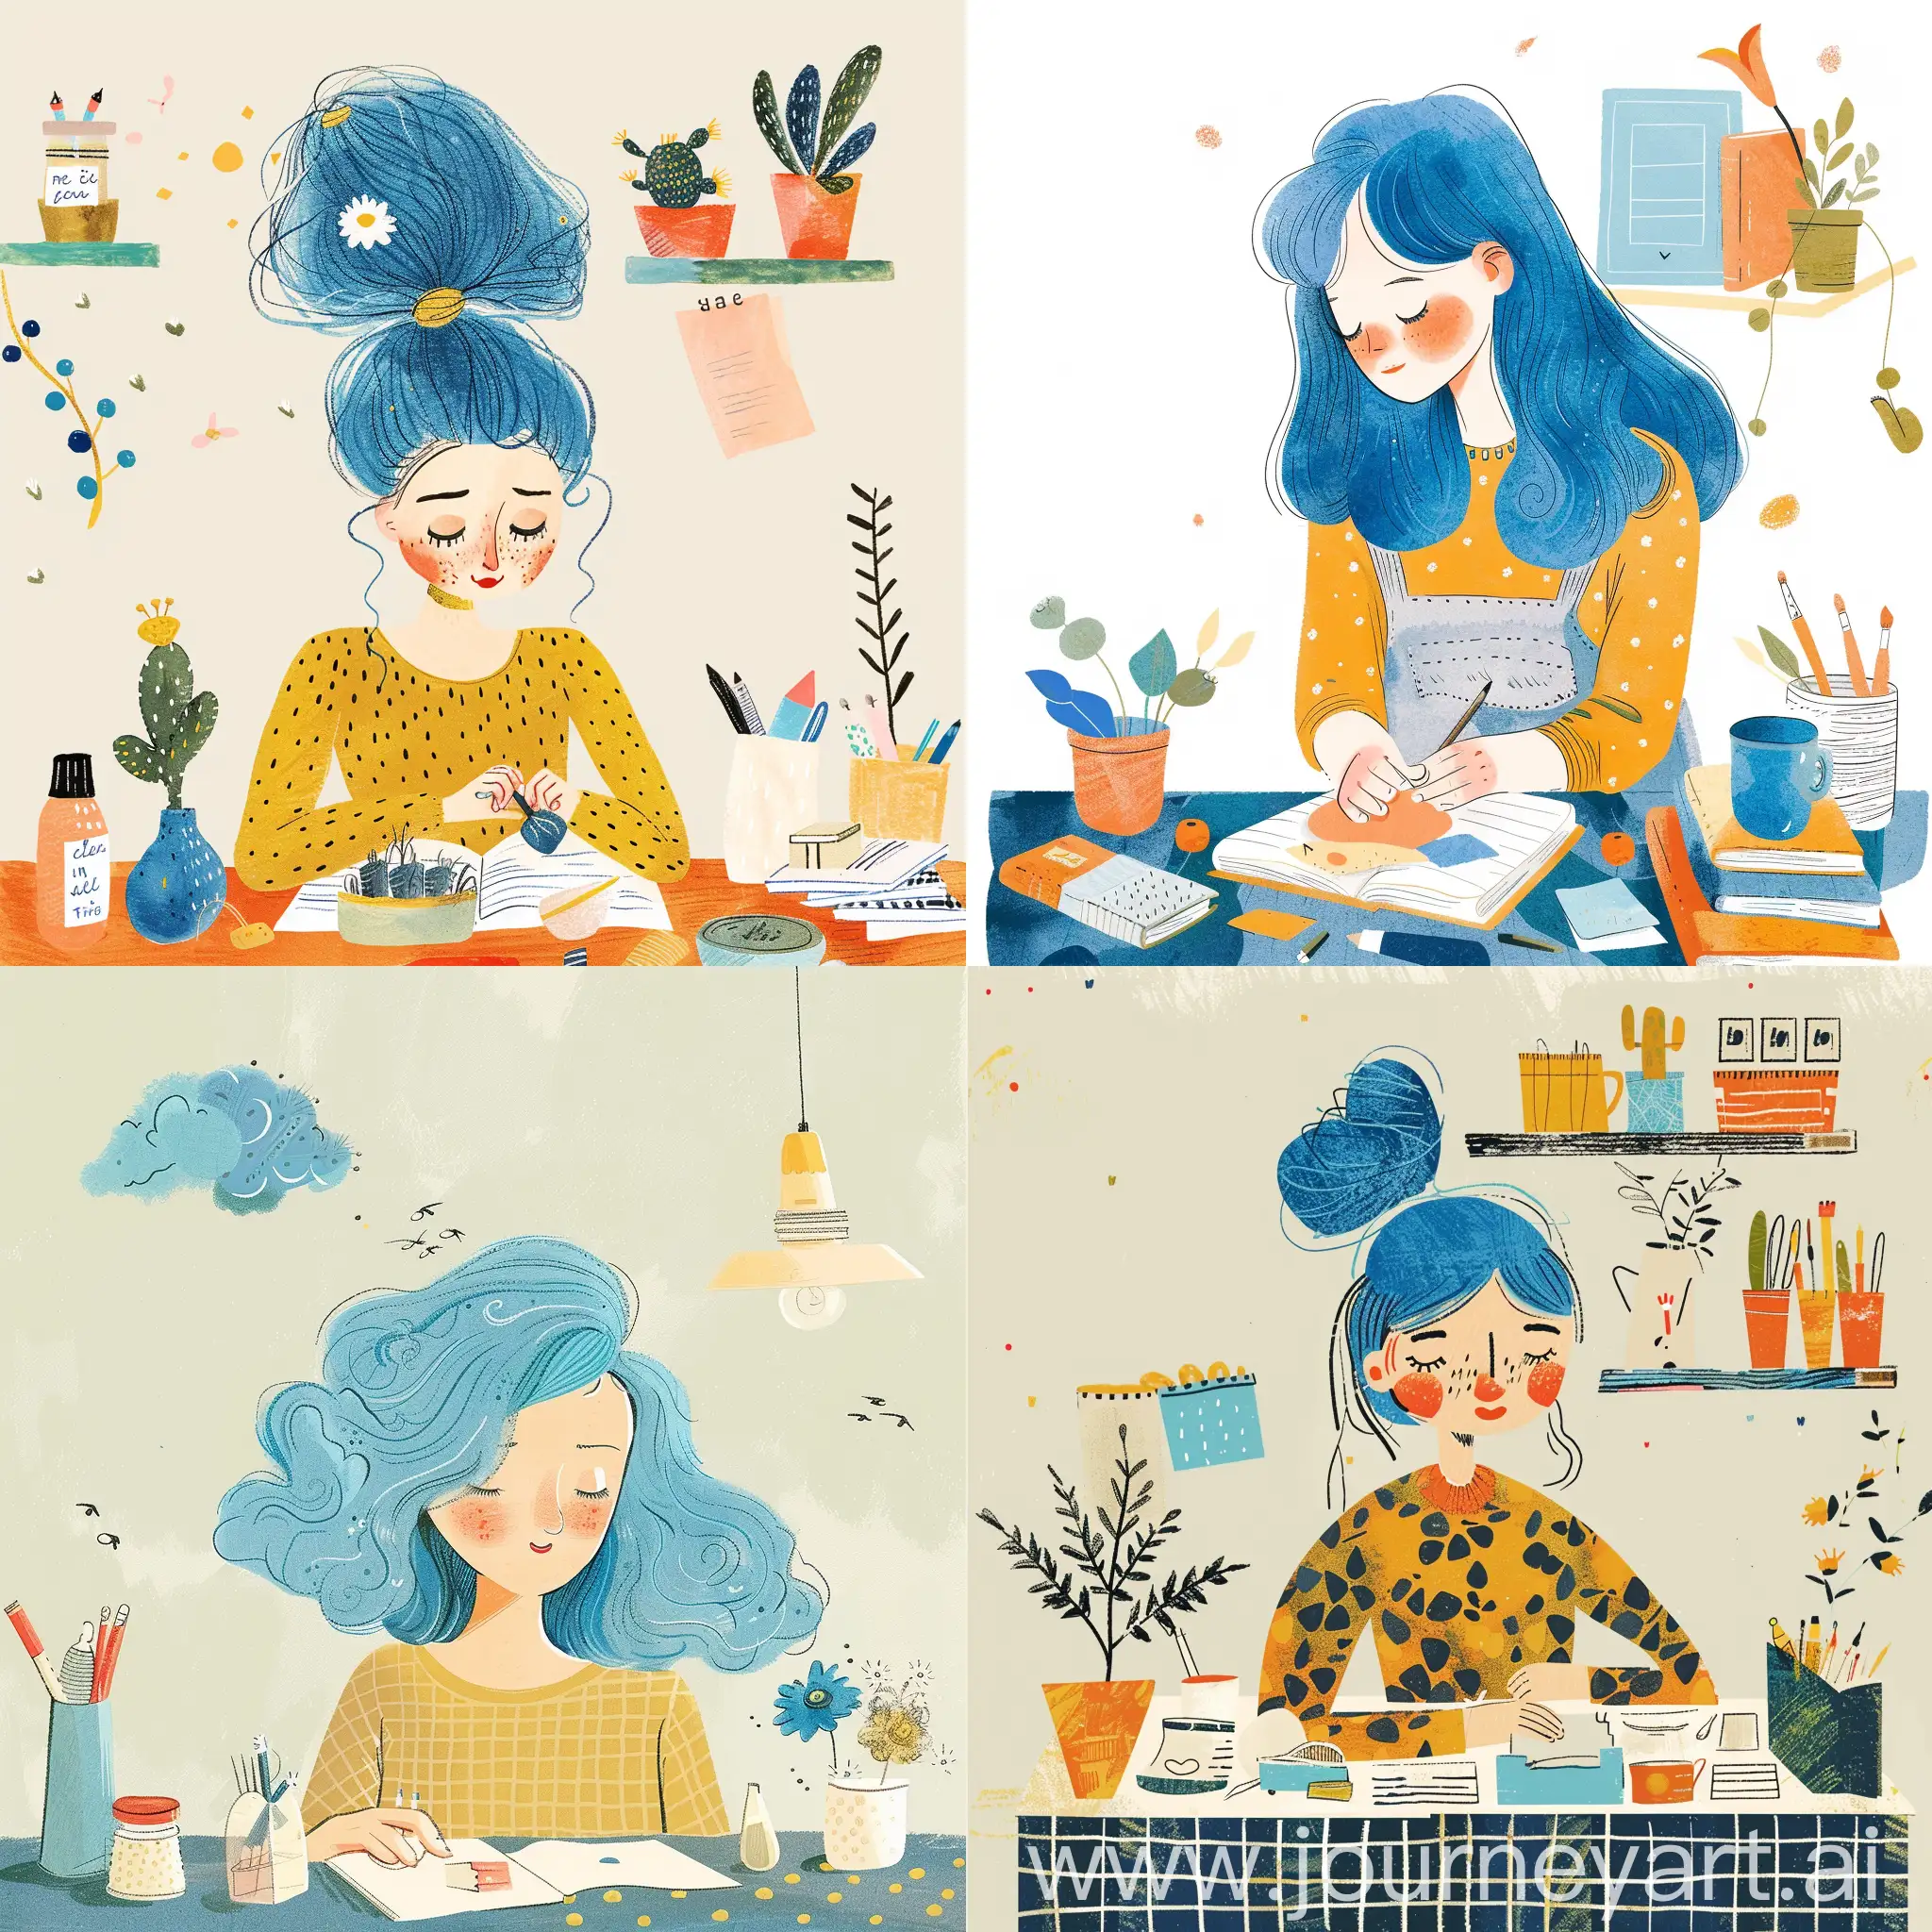 illustration of a gwoman with blue hair who is working onm tasks, children’s book illustration, whimsical and simple illustration aesthetic, bright colors, in the style of Clémence Guillemaud